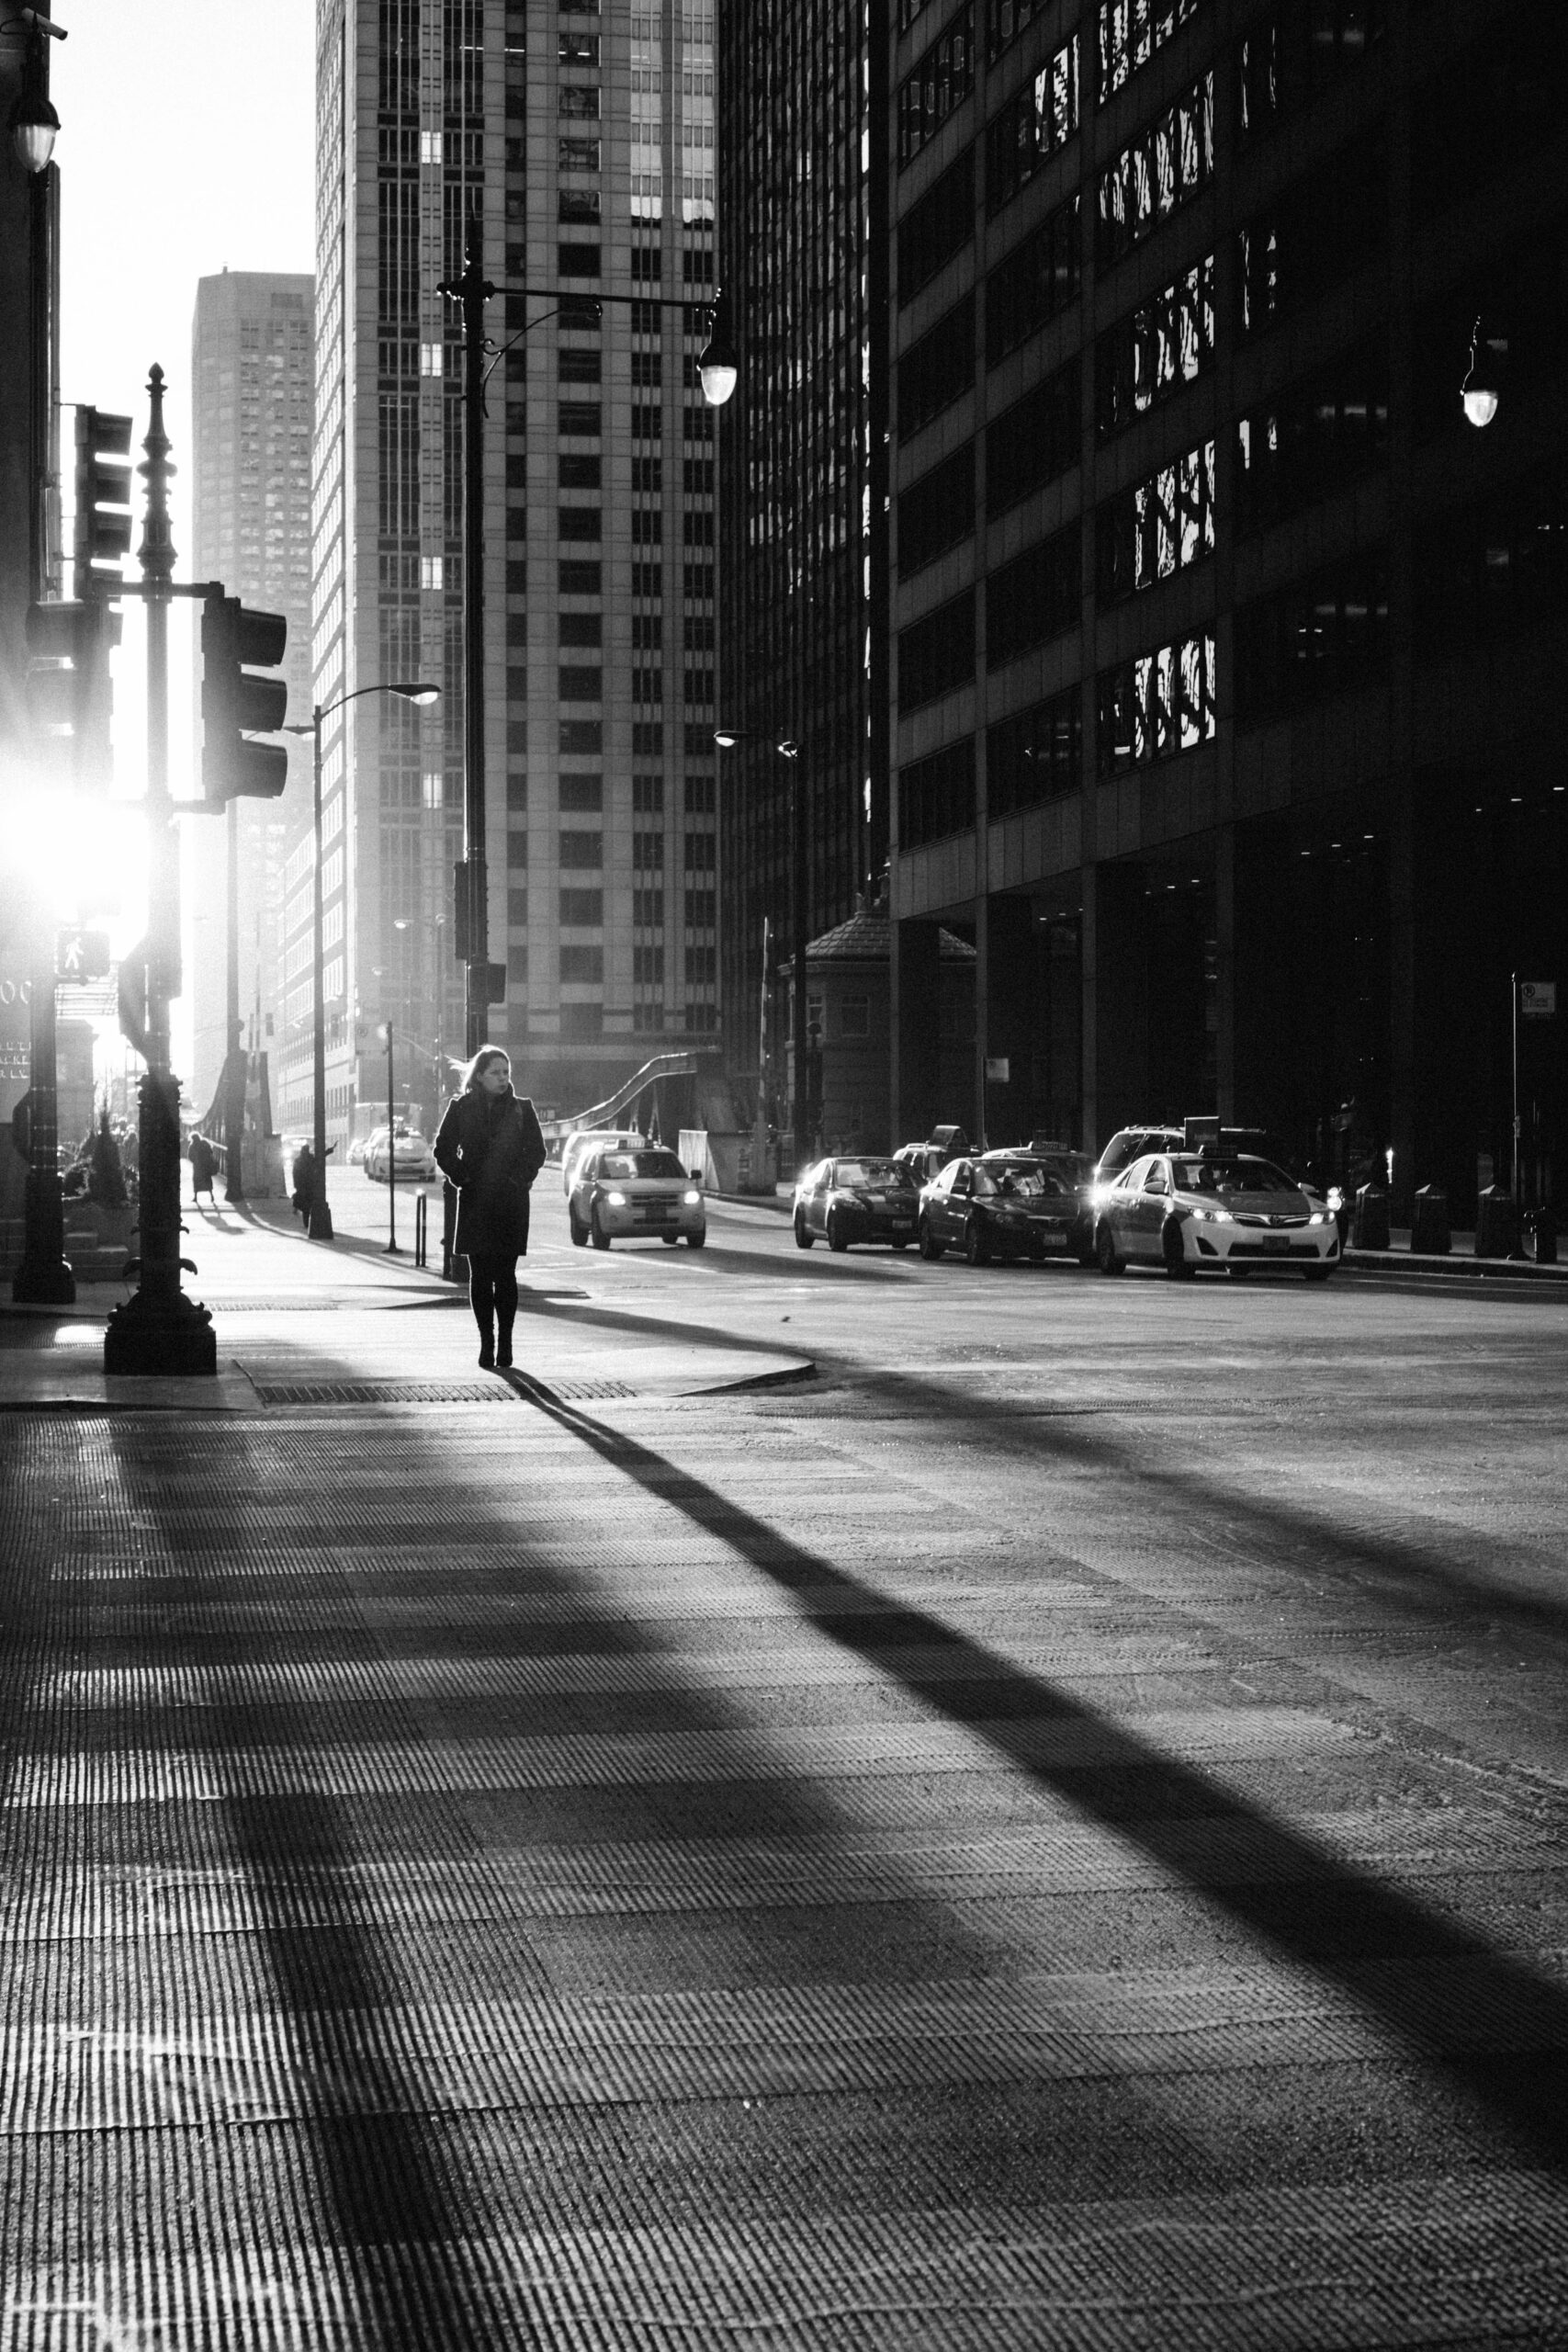 Shadow of a person crossing a street in a large city